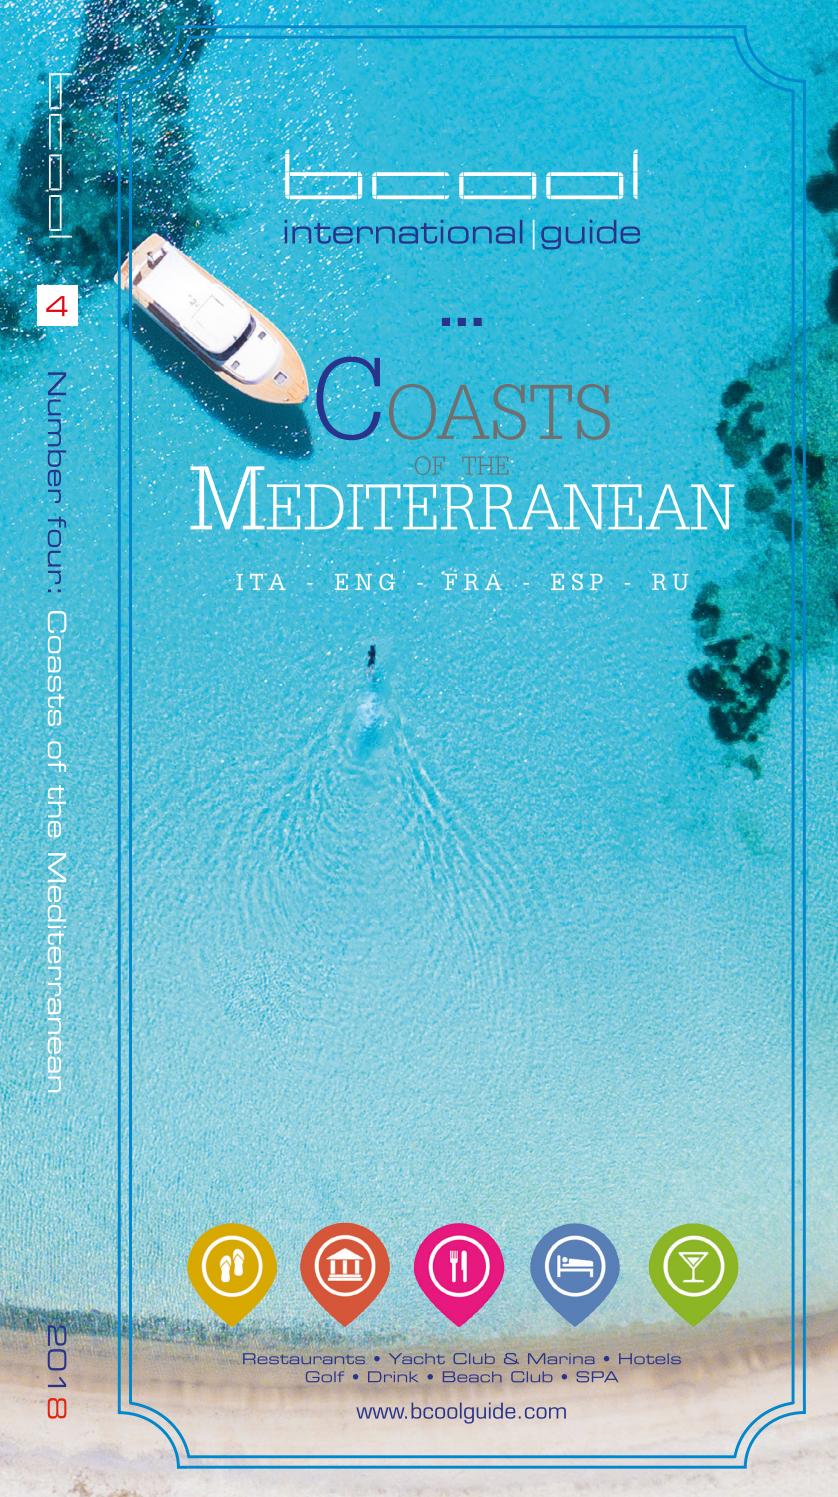 Salon Exterieur Palette Luxe 2018 Bcool Guide "coasts Of the Mediterrean" by Bcool City